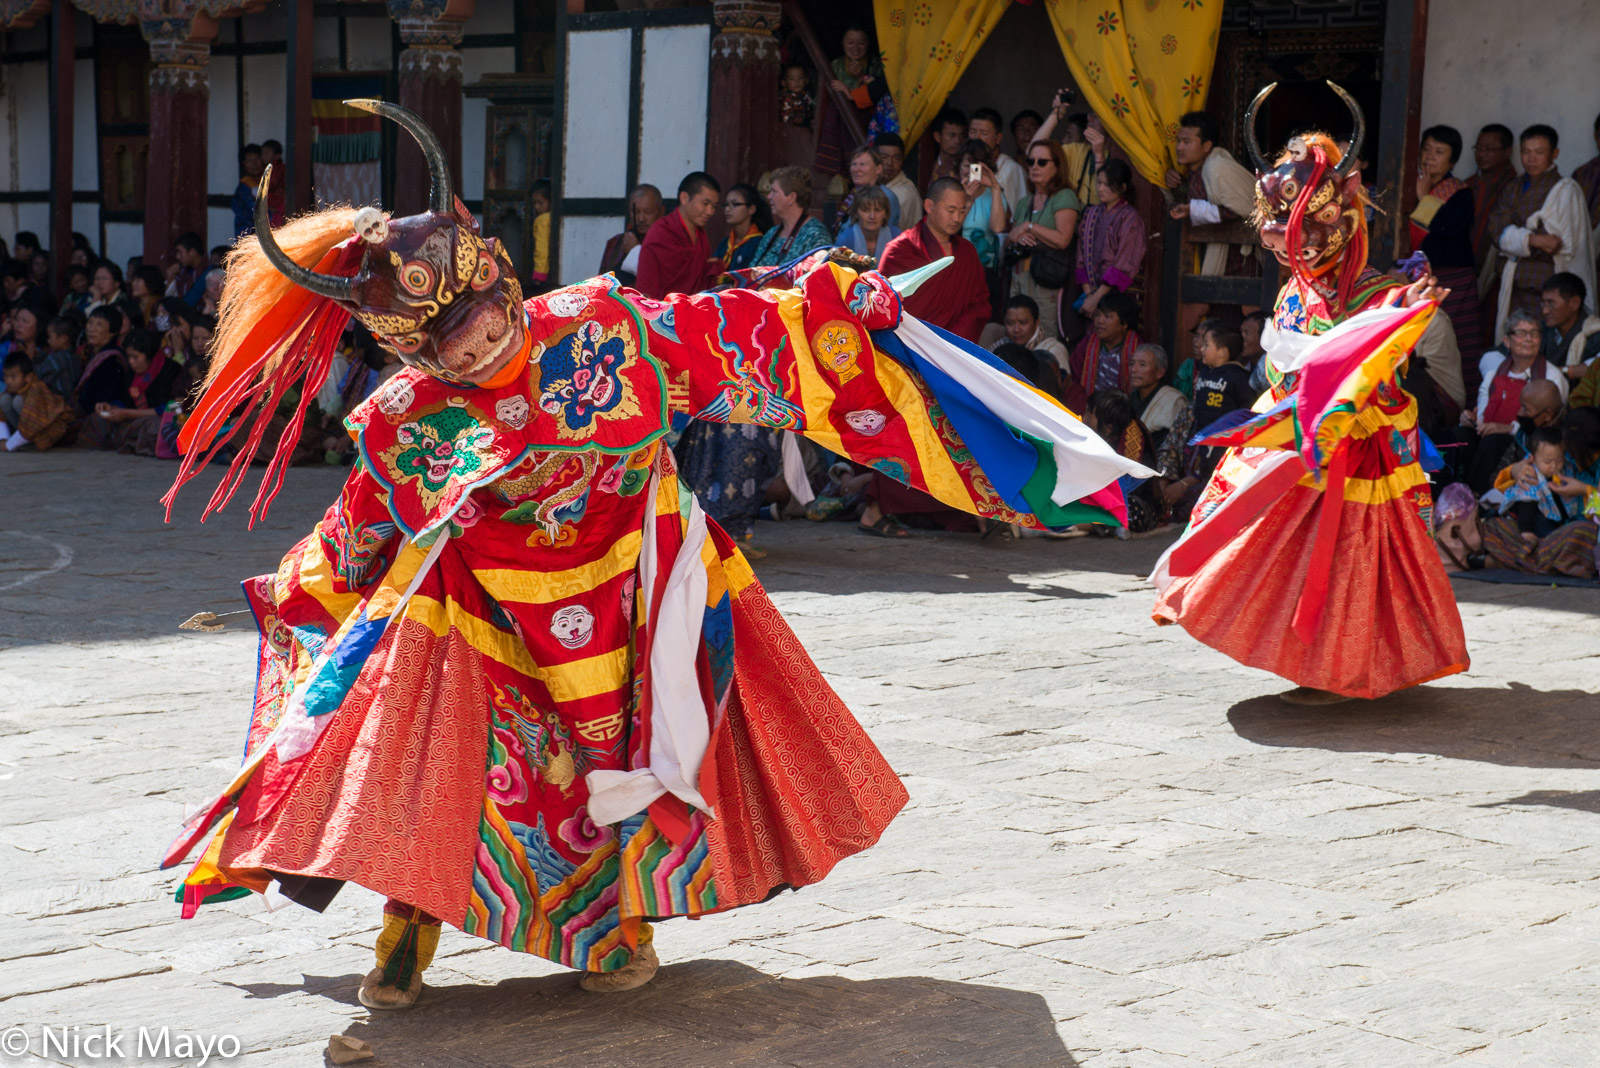 Two masked monks dancing at the tshechu in Trashigang dzong.